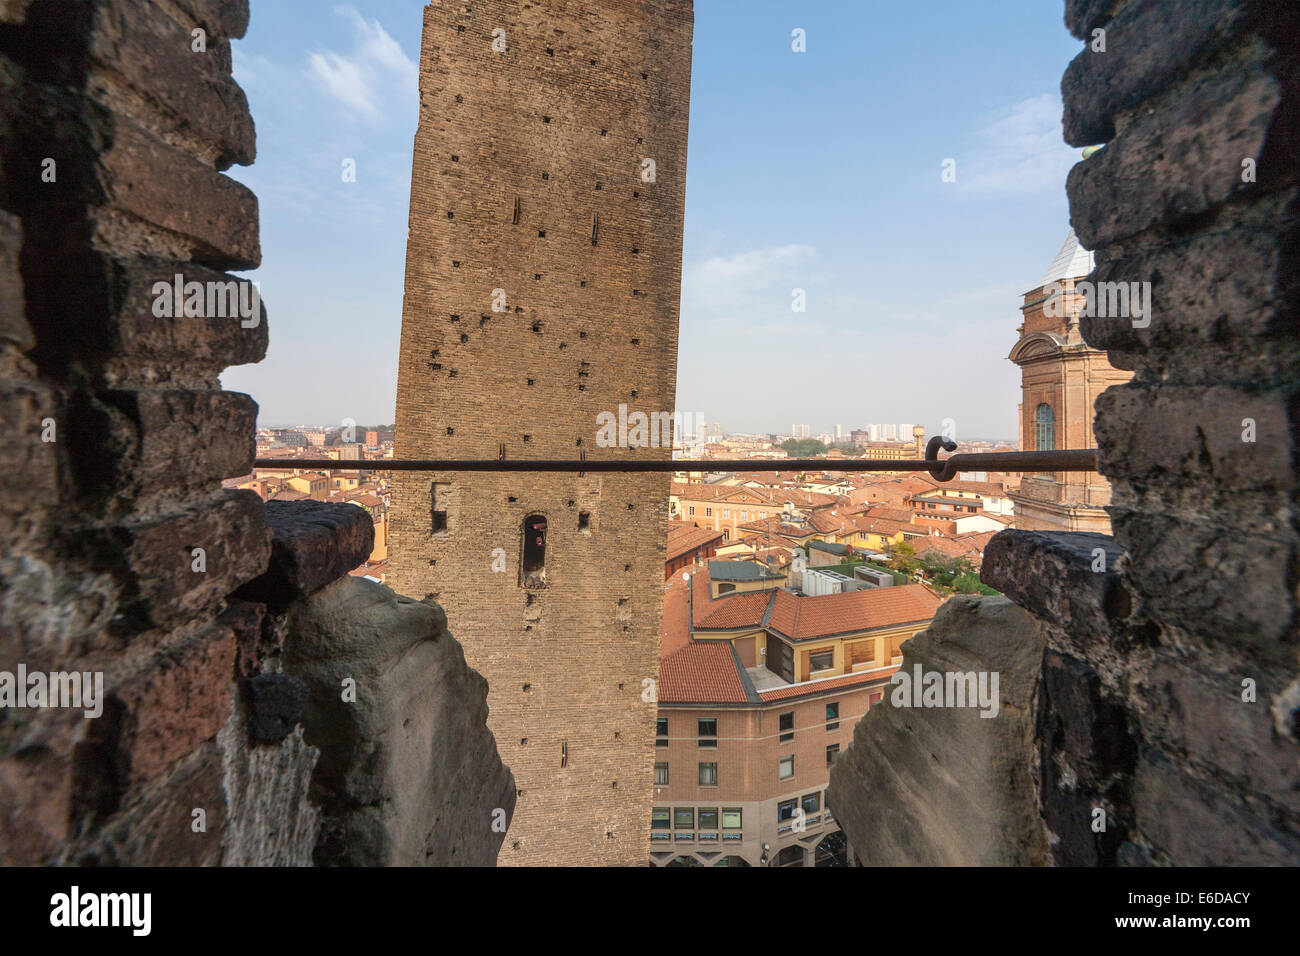 Bologna Leaning, tilting Garisenda Tower seen from the Asinelli Tower. Stock Photo